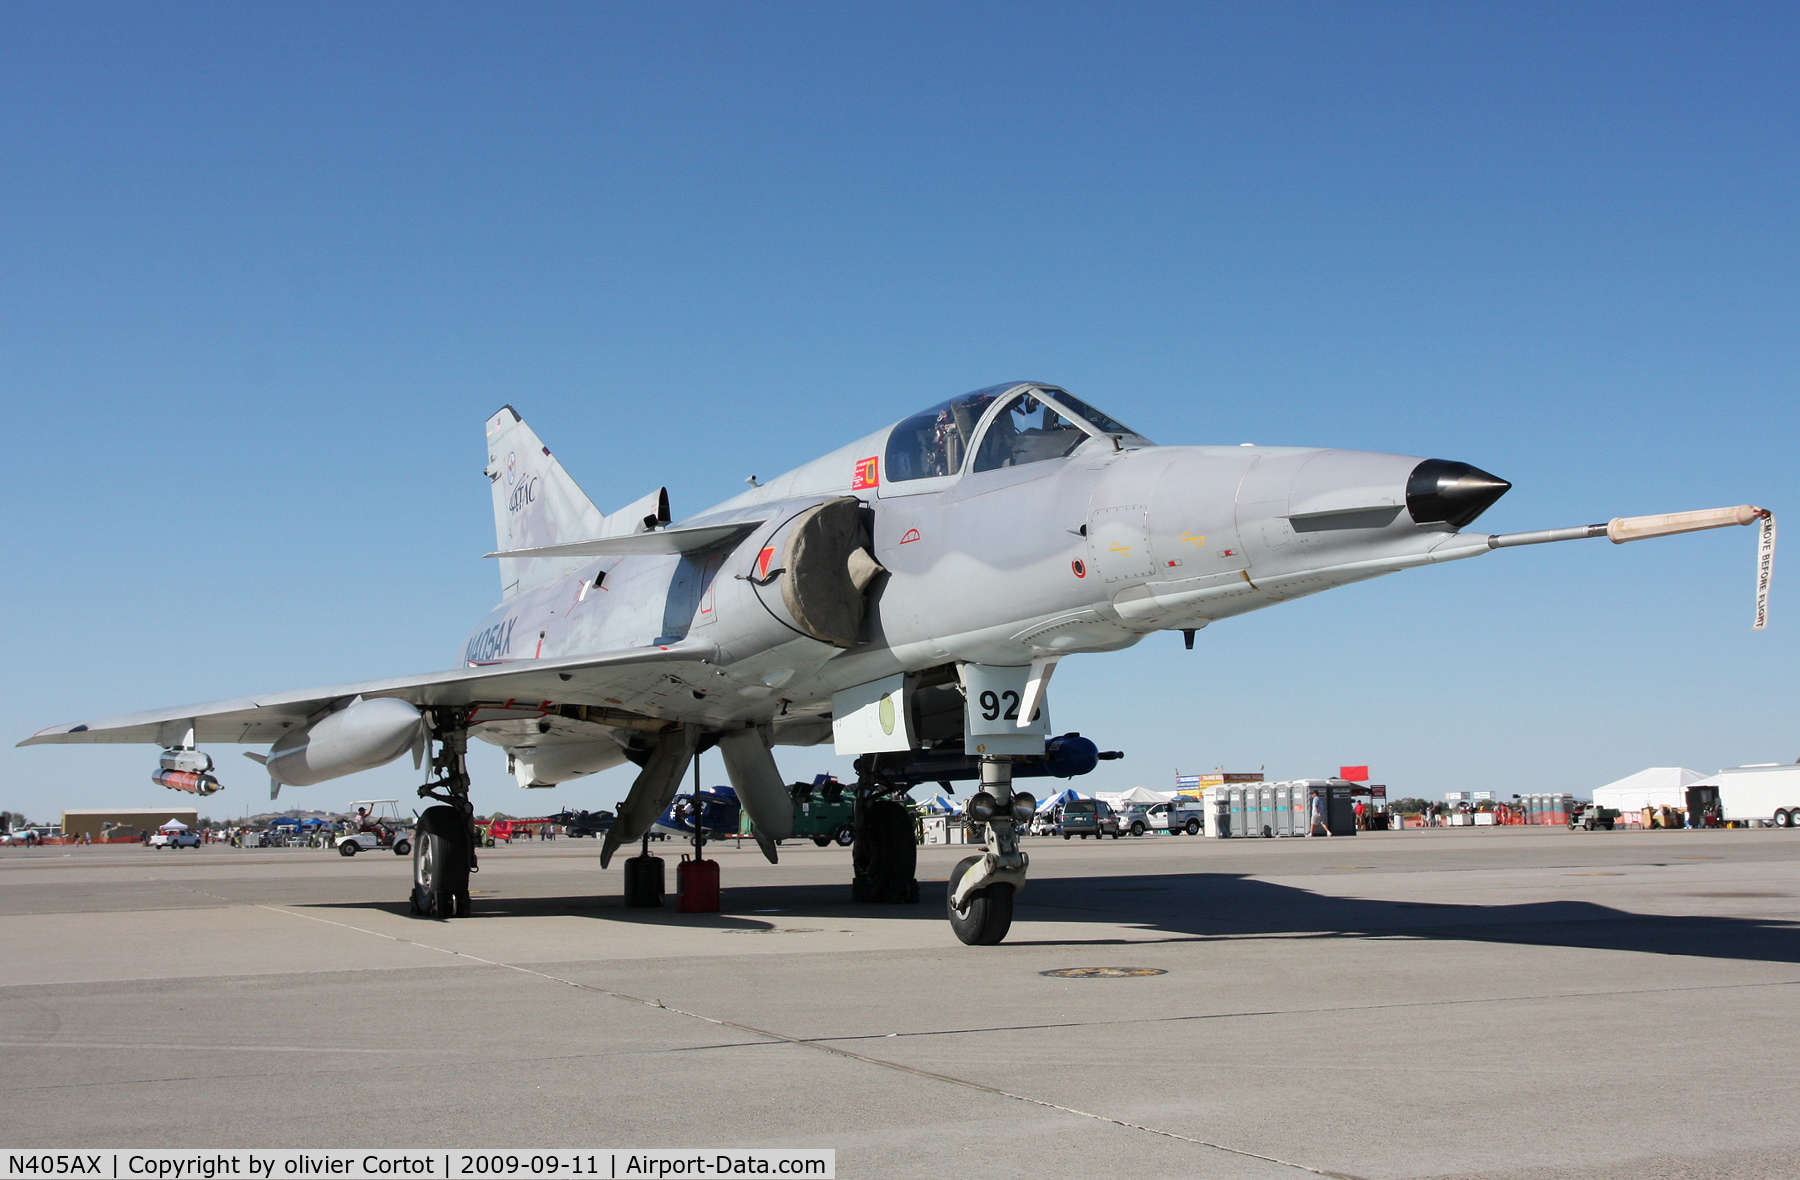 N405AX, Israel Aircraft Industries Kfir C.2 C/N 145, great opportunity to see this Kfir at the Fallon airshow 2009